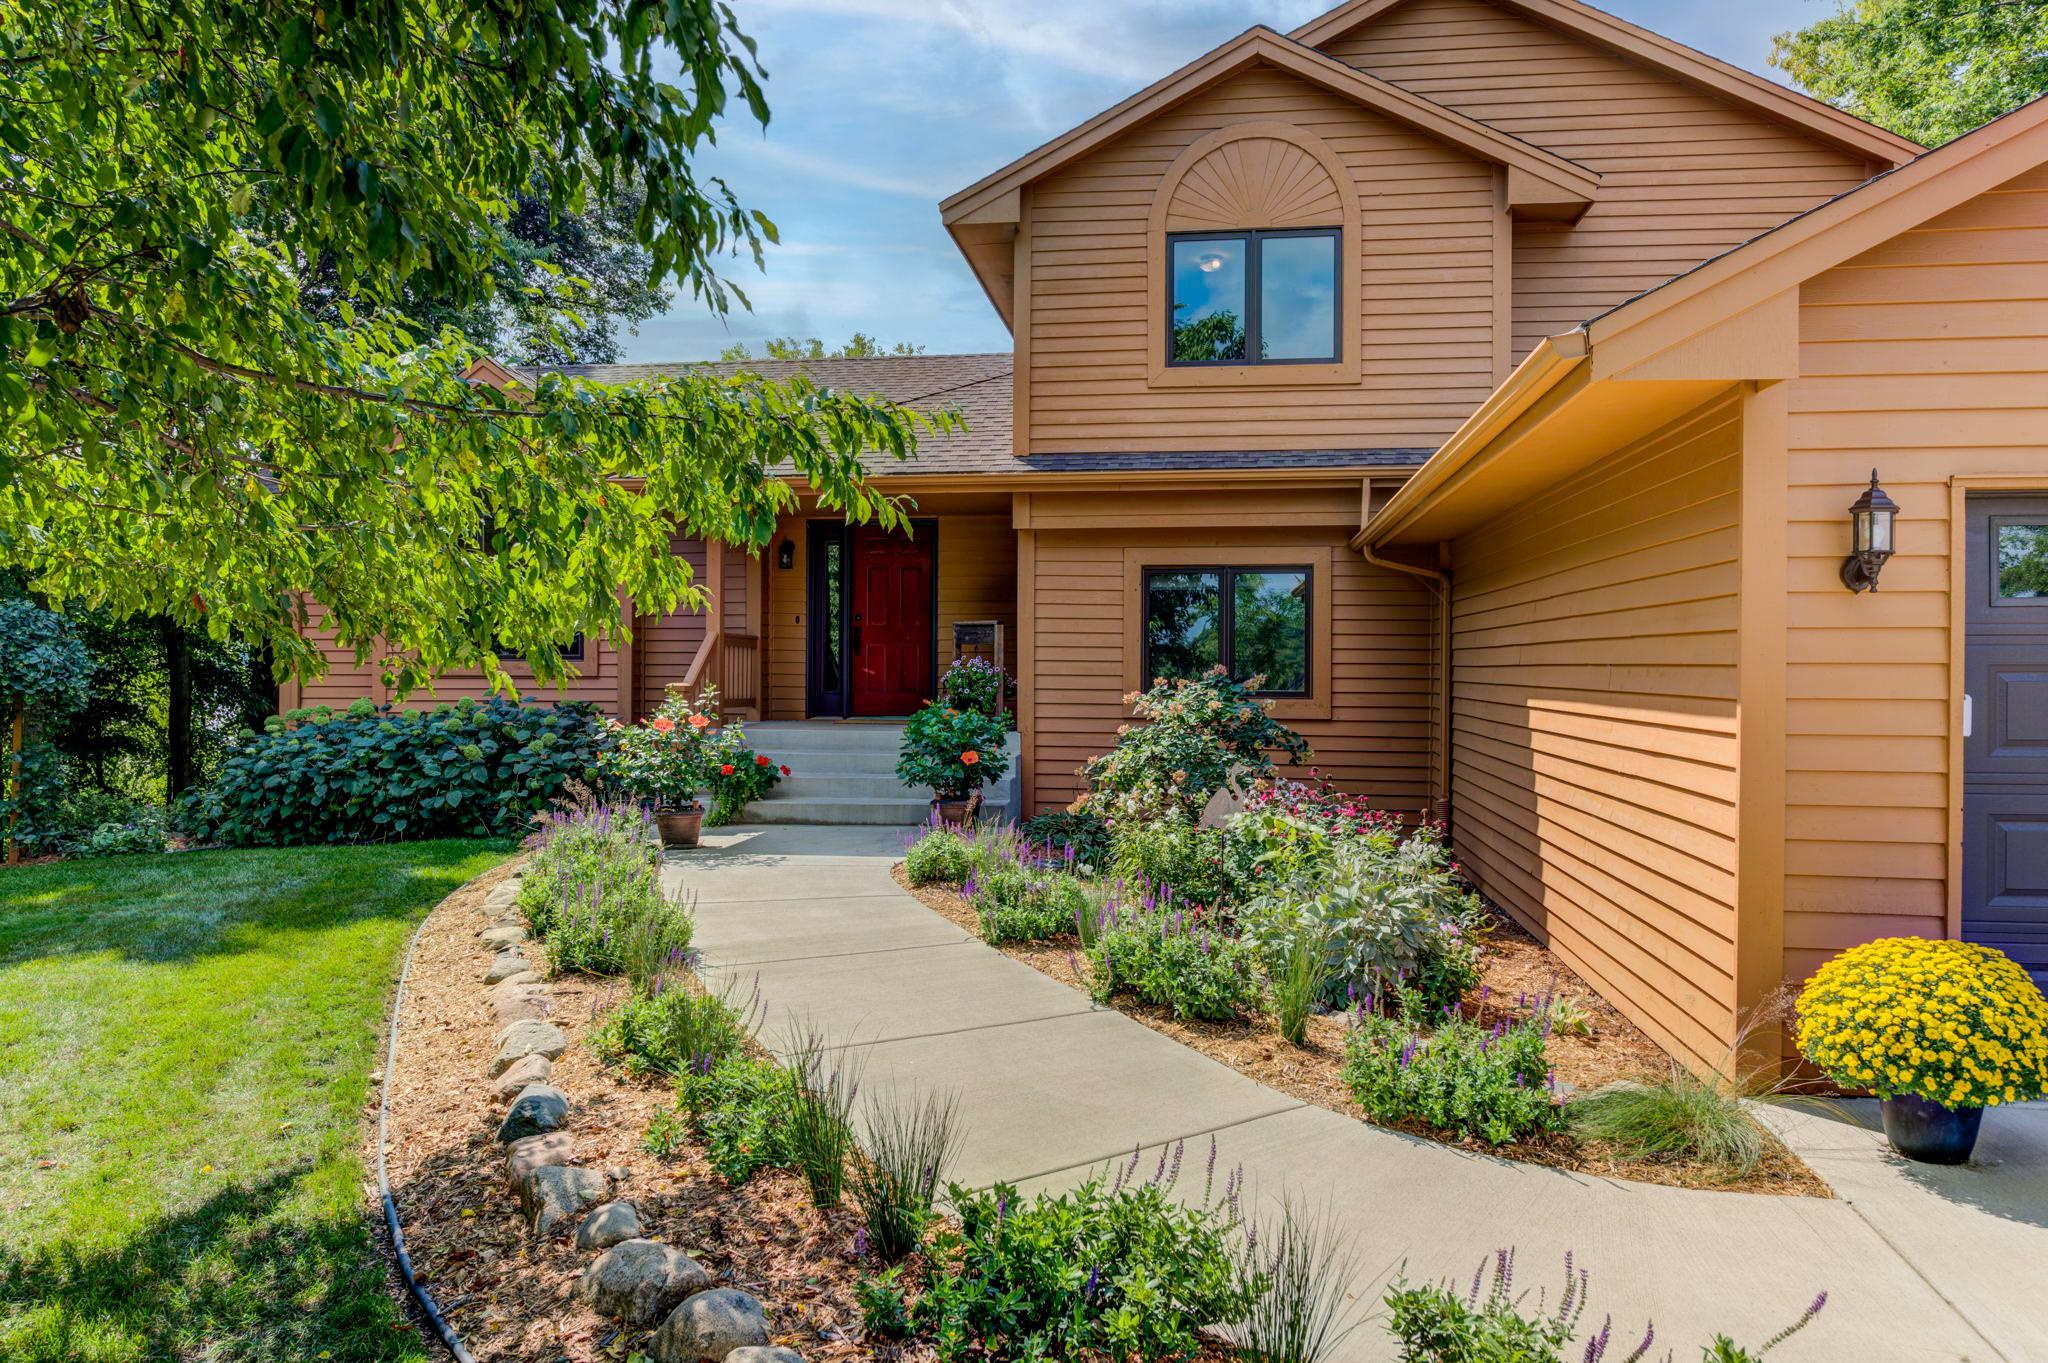 You will fall in love with the perennial gardens and landscaping surrounding this home. The pride of ownership is apparent!